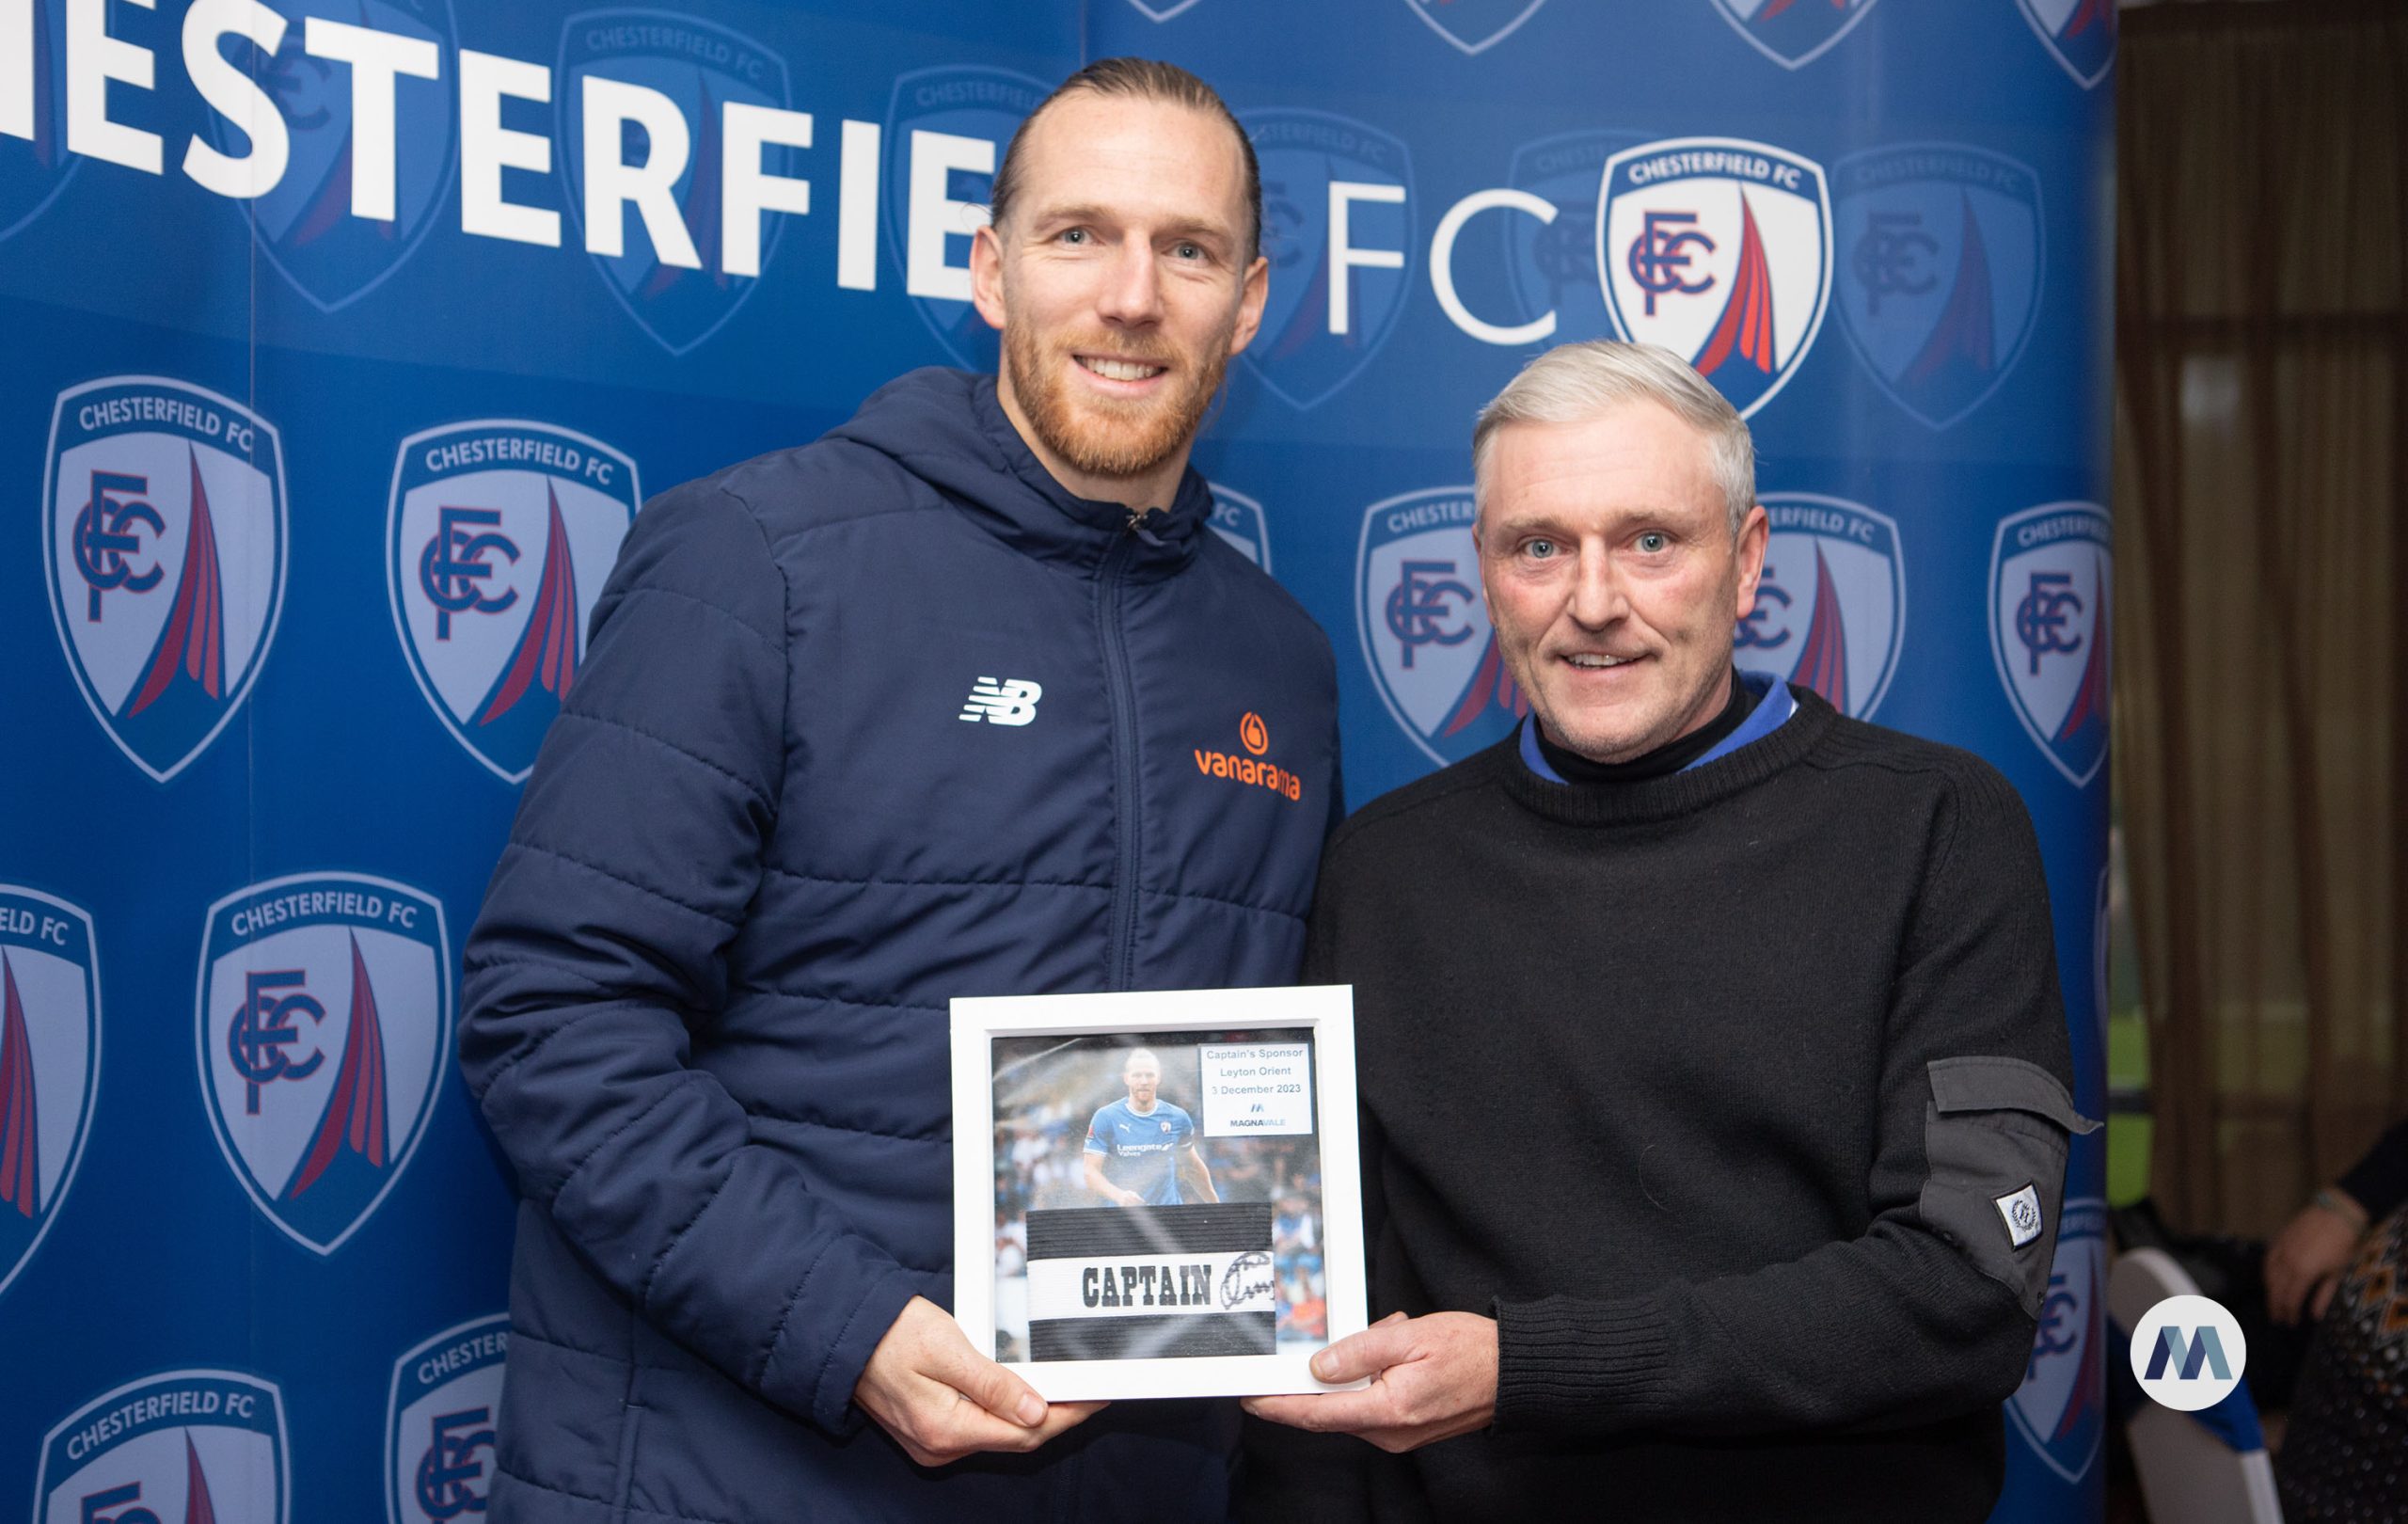 Magnavale Chesterfield Site Manager, Mark Bexton with Chesterfield FC Player